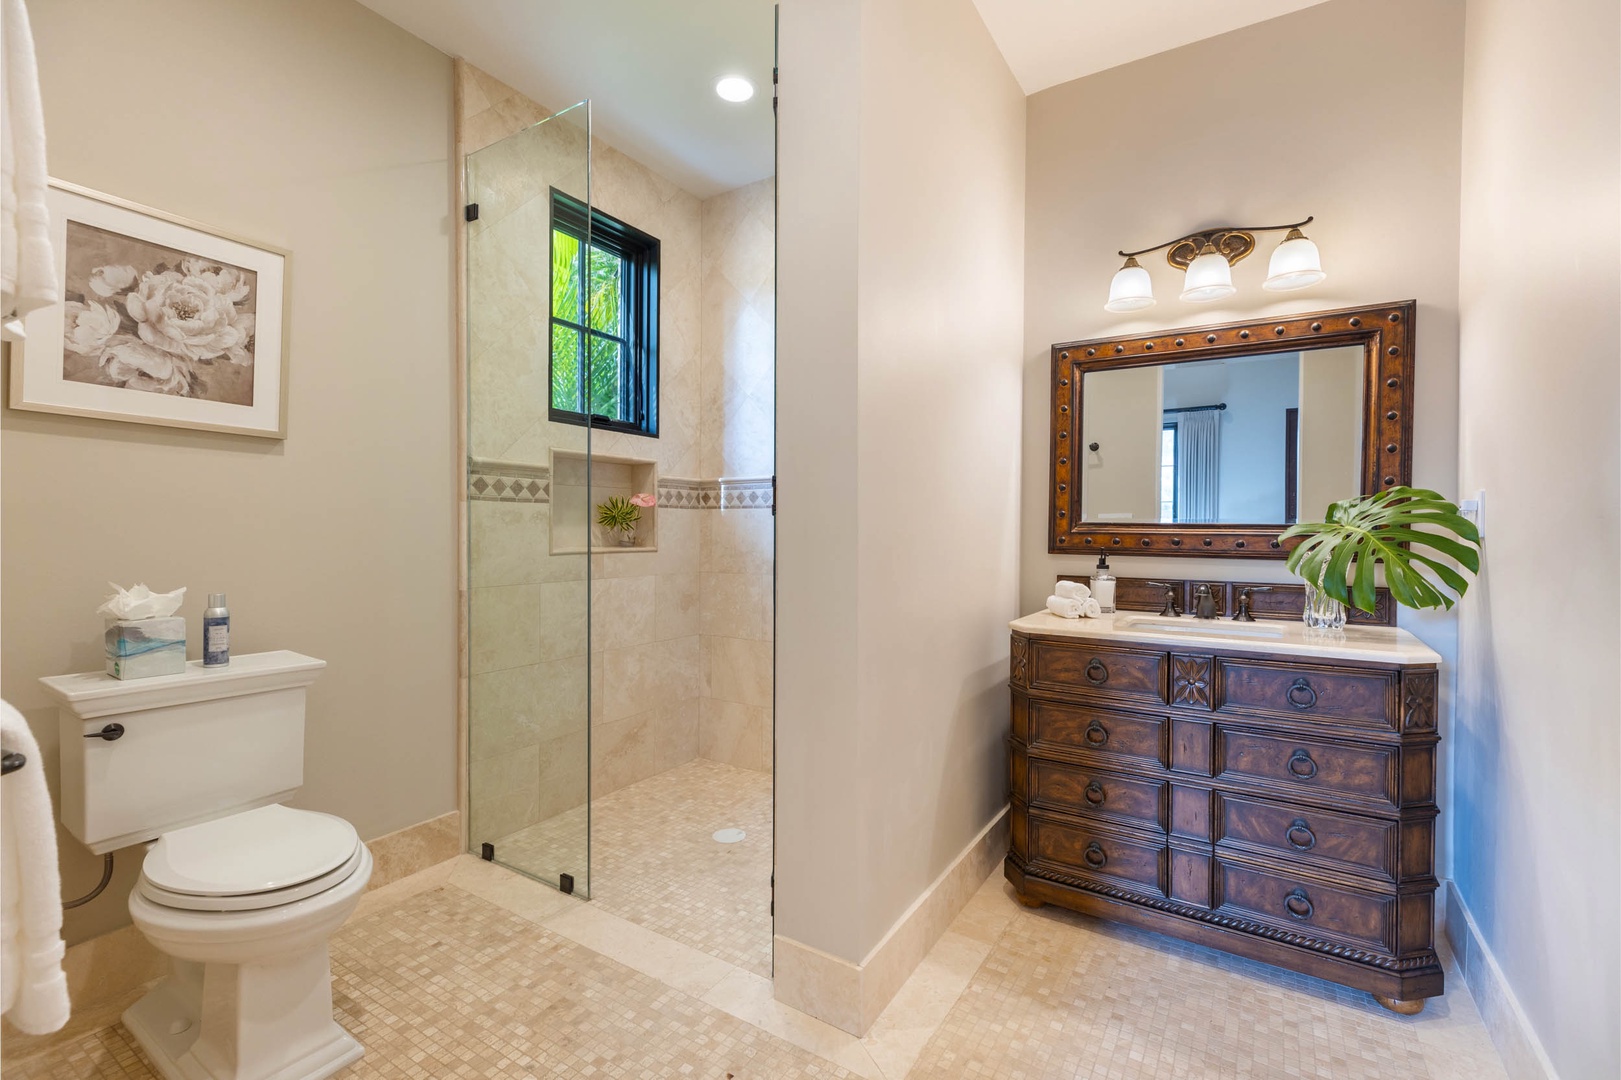 Honolulu Vacation Rentals, Royal Kahala Estate - Ensuite bath with a walk-in shower in a glass enclosure.